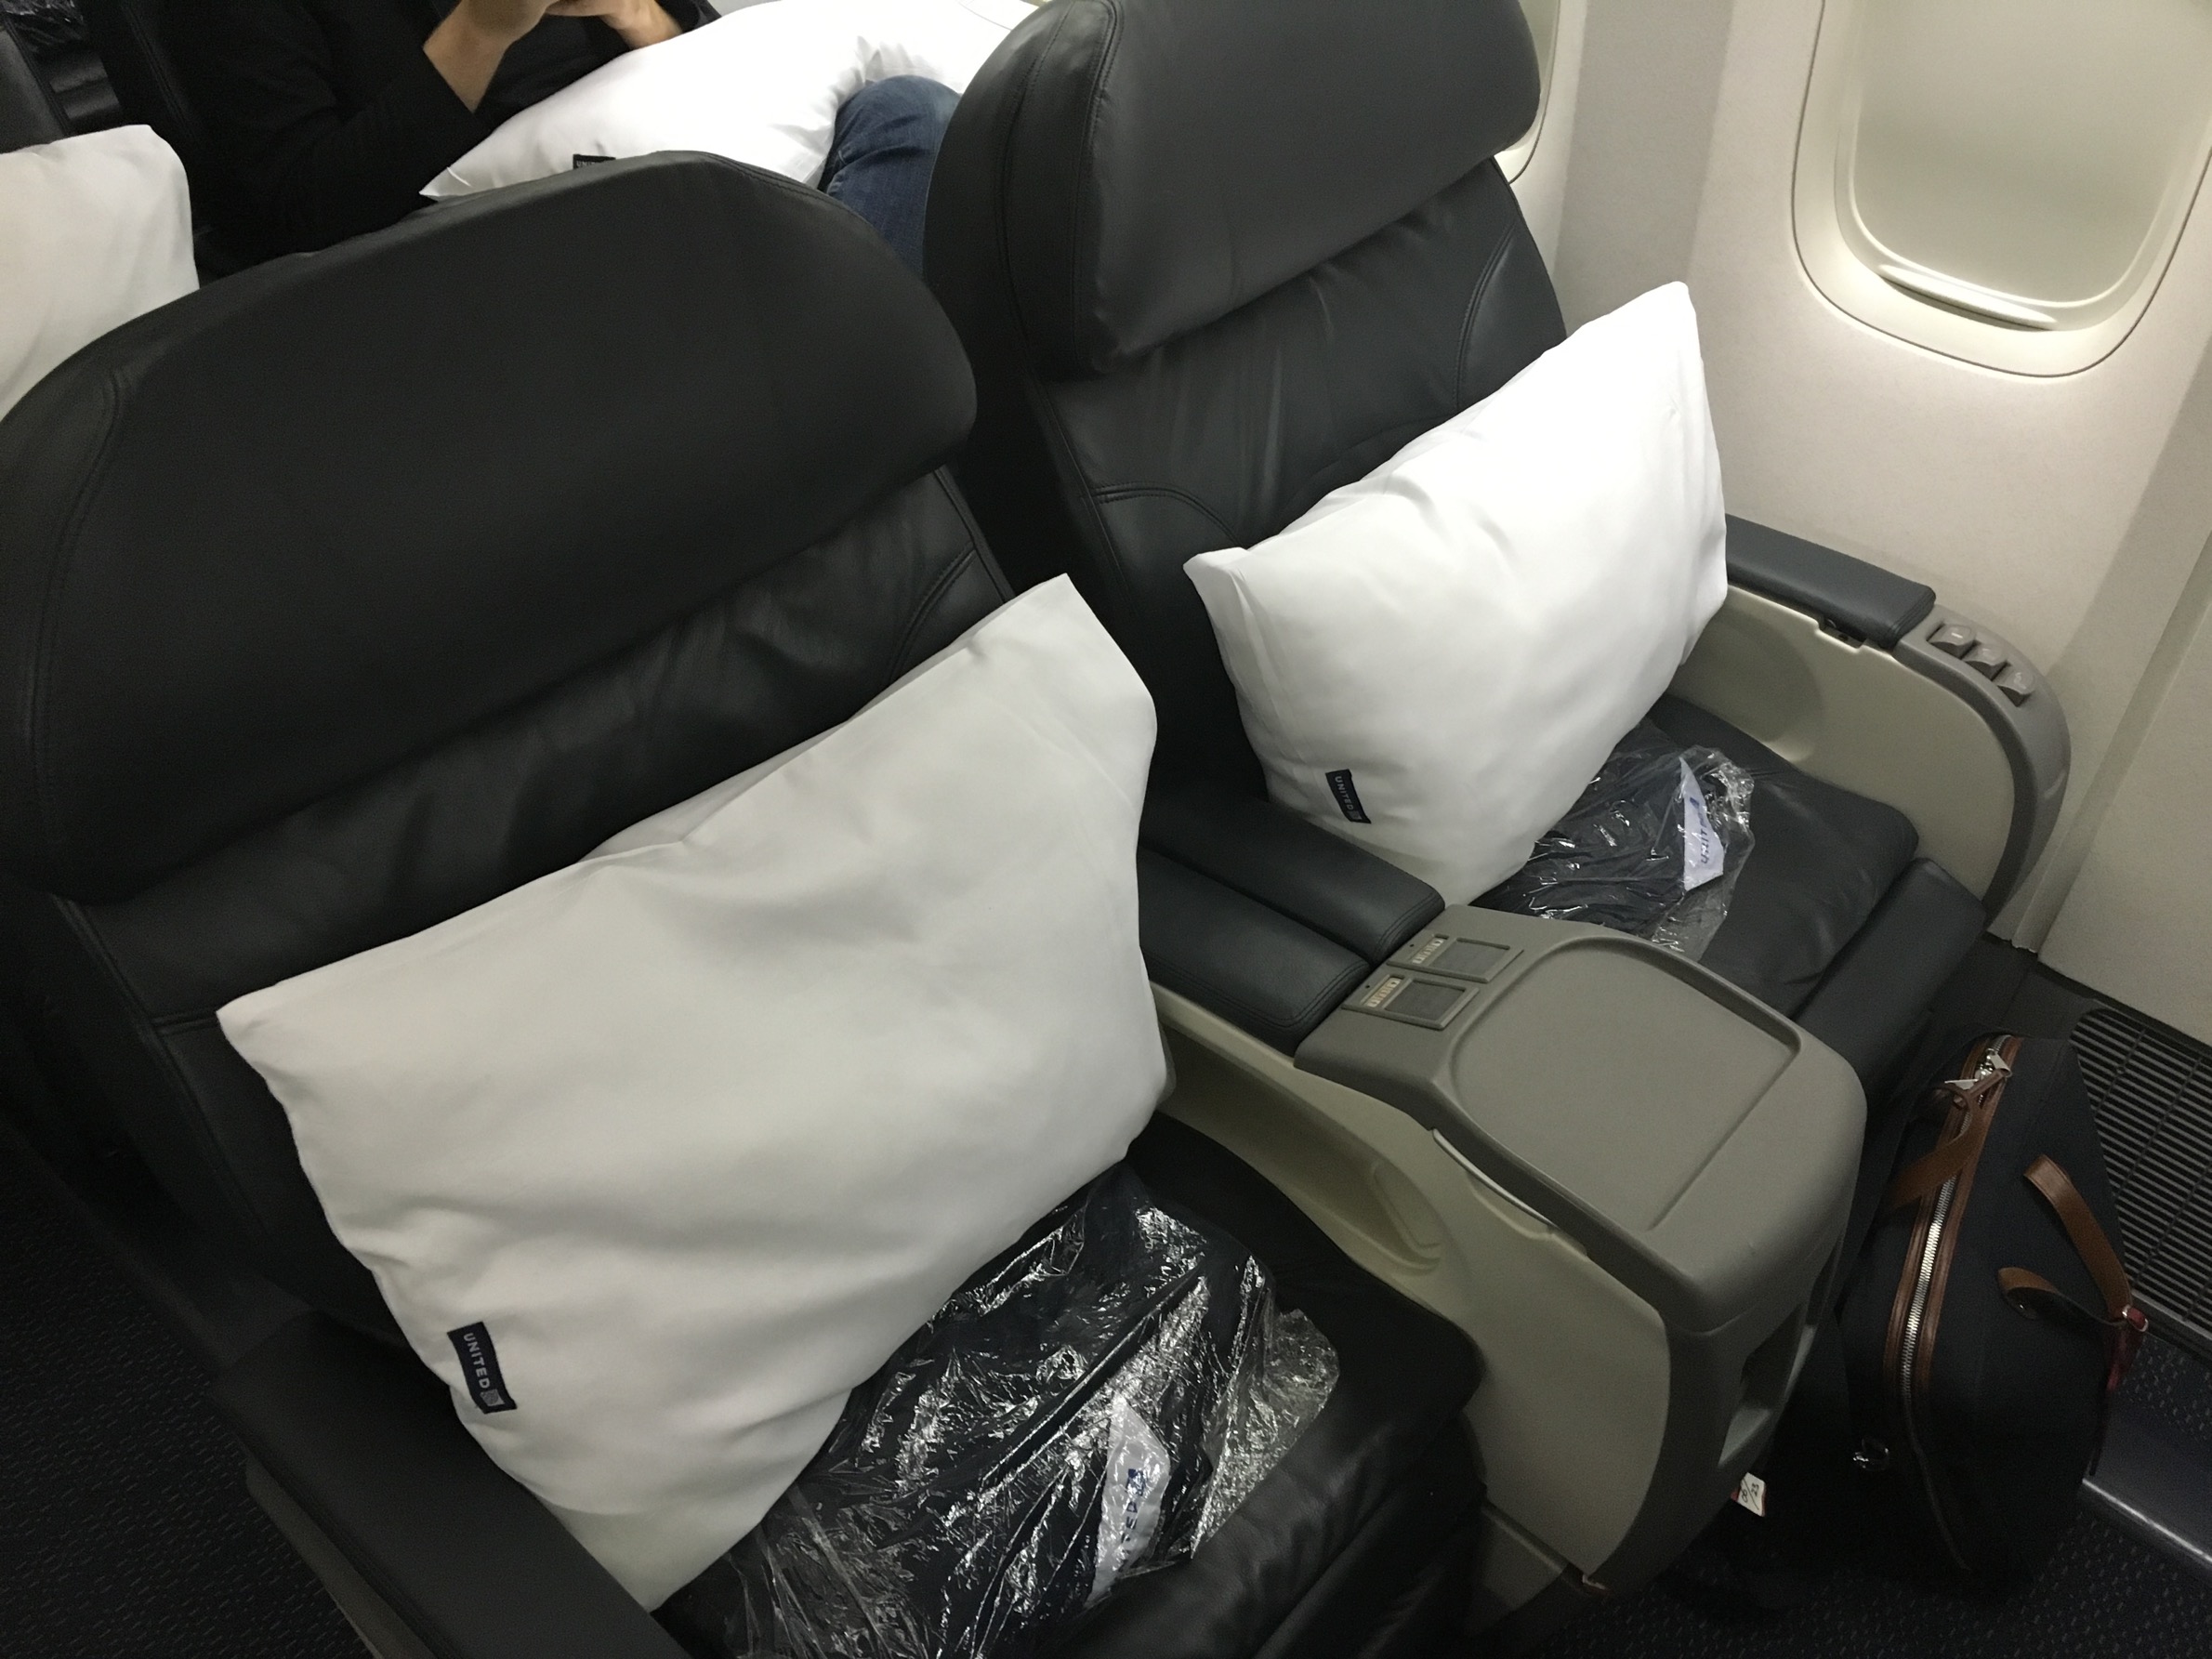 United Airlines First Class B777 San Francisco to Chicago